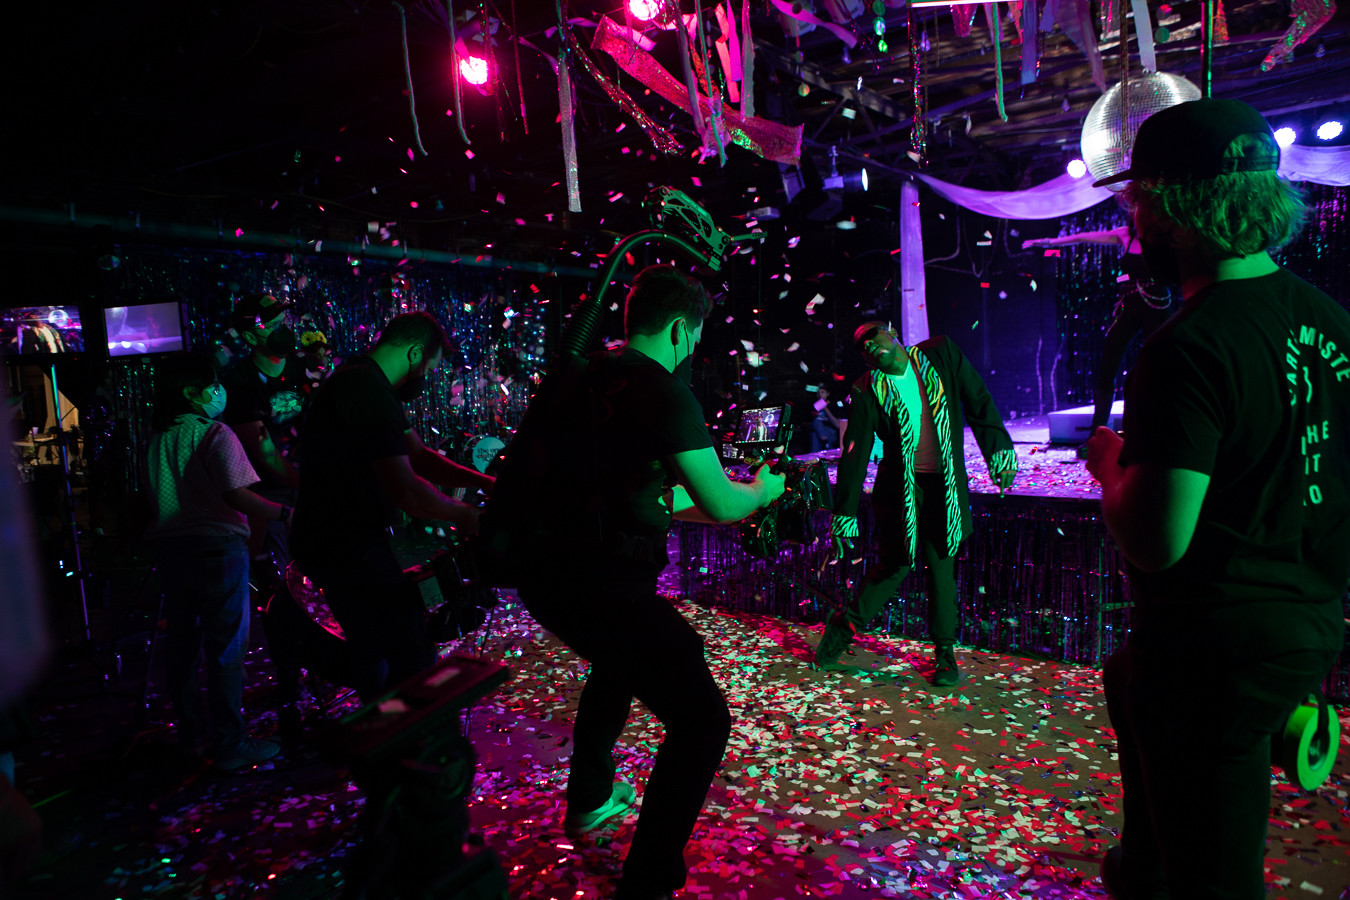 Production team filming a man dancing while confetti is pouring down.